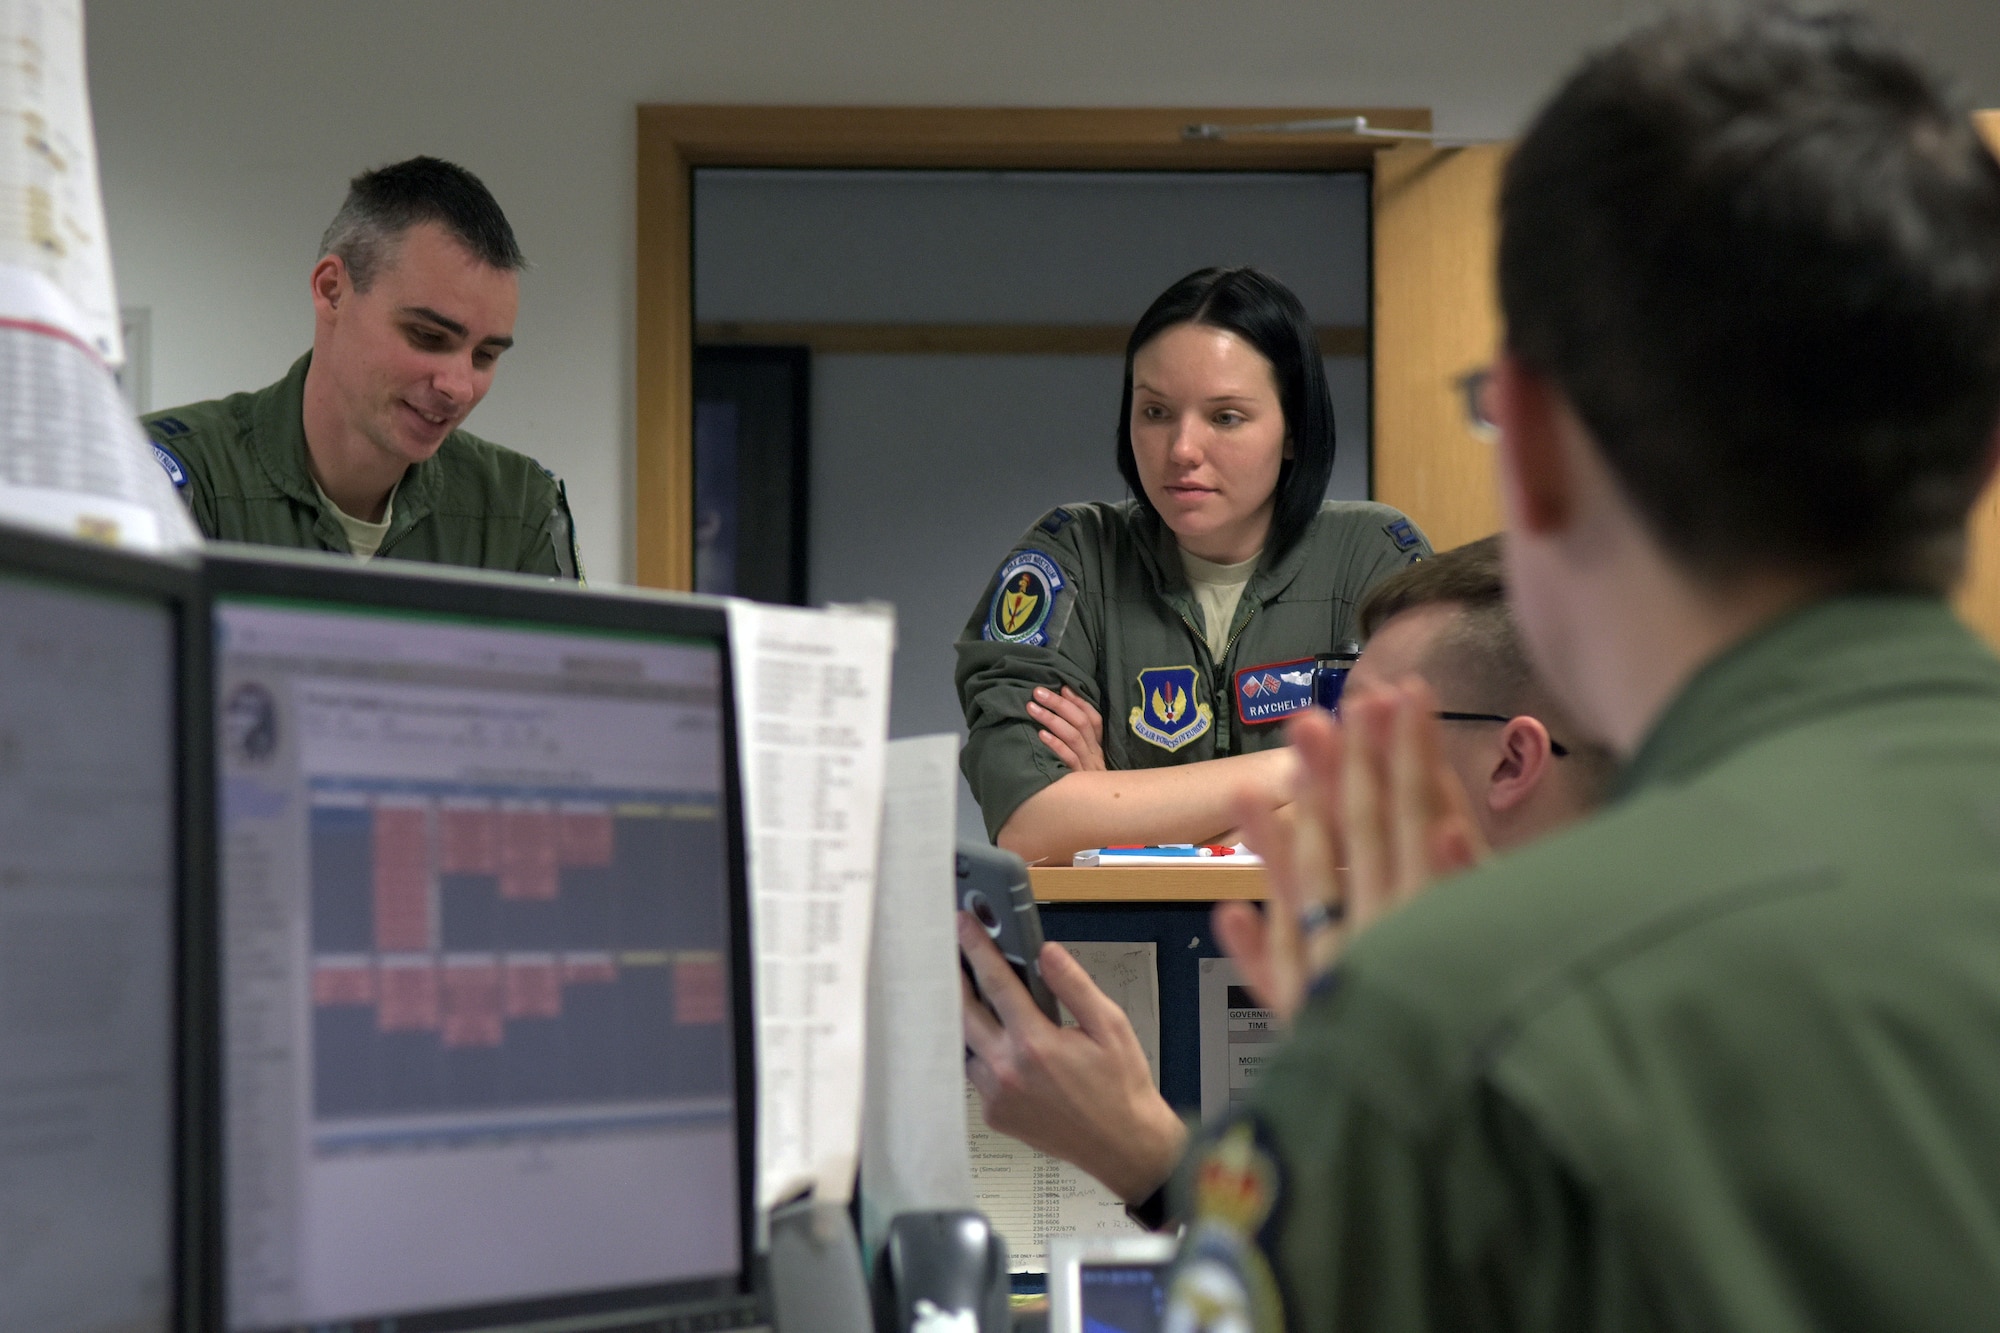 U.S. Air Force Capt. Raychel Bates, center, 351st Air Refueling Squadron assistant “A” flight commander, discusses the process of building aircrews for the exercise on RAF Mildenhall, England, Feb. 26, 2018. Aircrews are comprised of two pilots and a boom operator, who conducts the refueling. (U.S. Air Force photo by Airman 1st Class Benjamin Cooper)